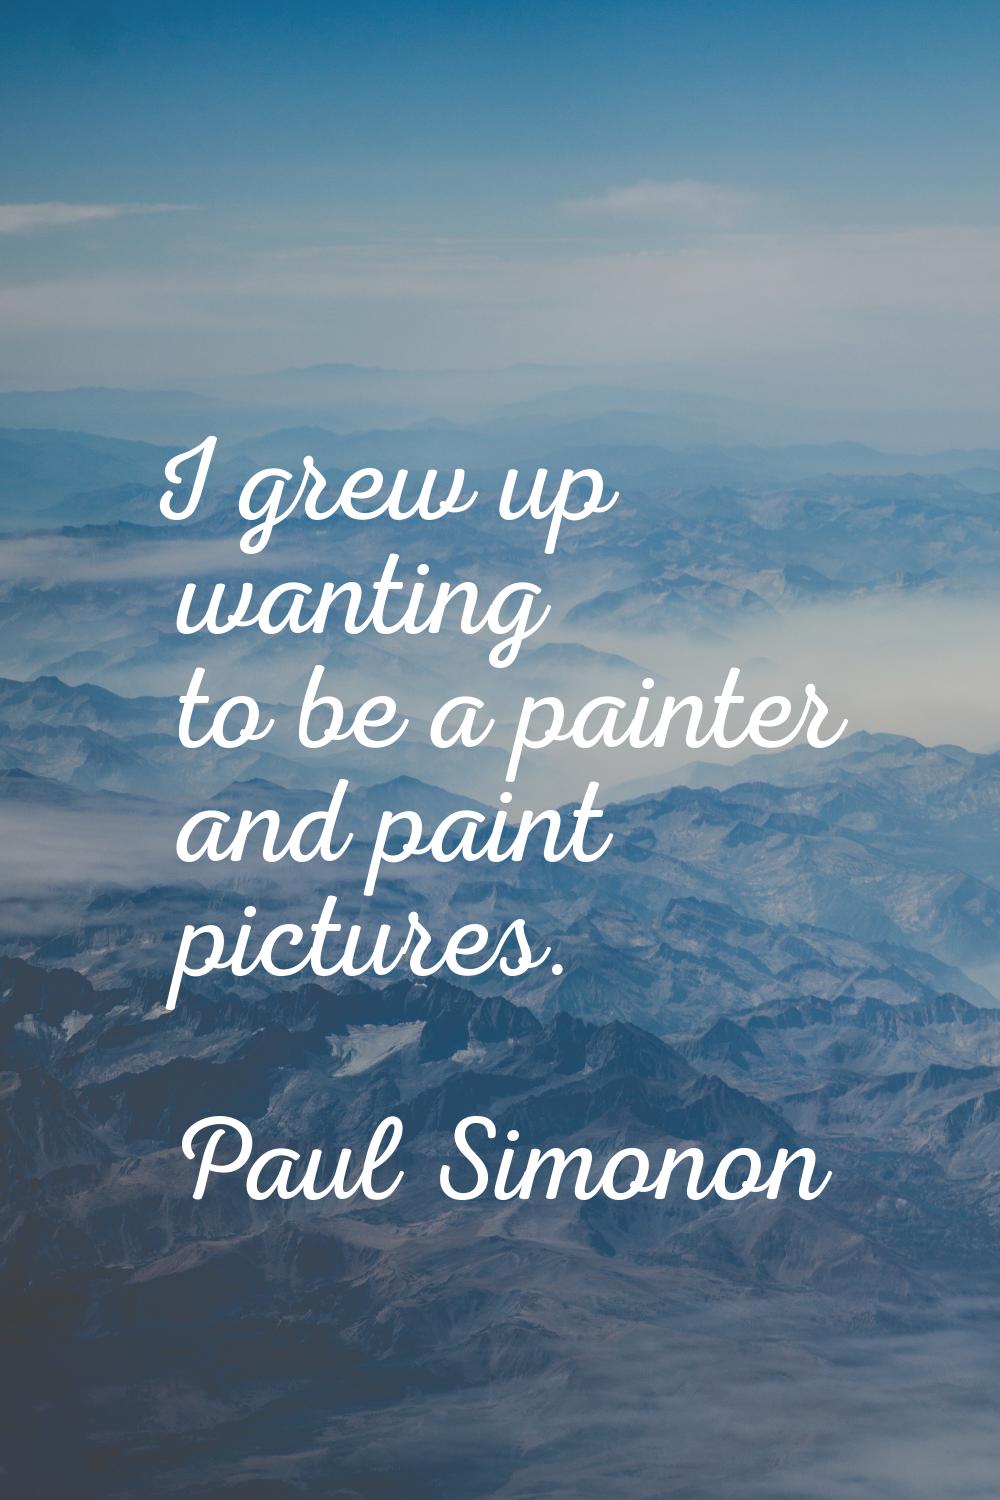 I grew up wanting to be a painter and paint pictures.